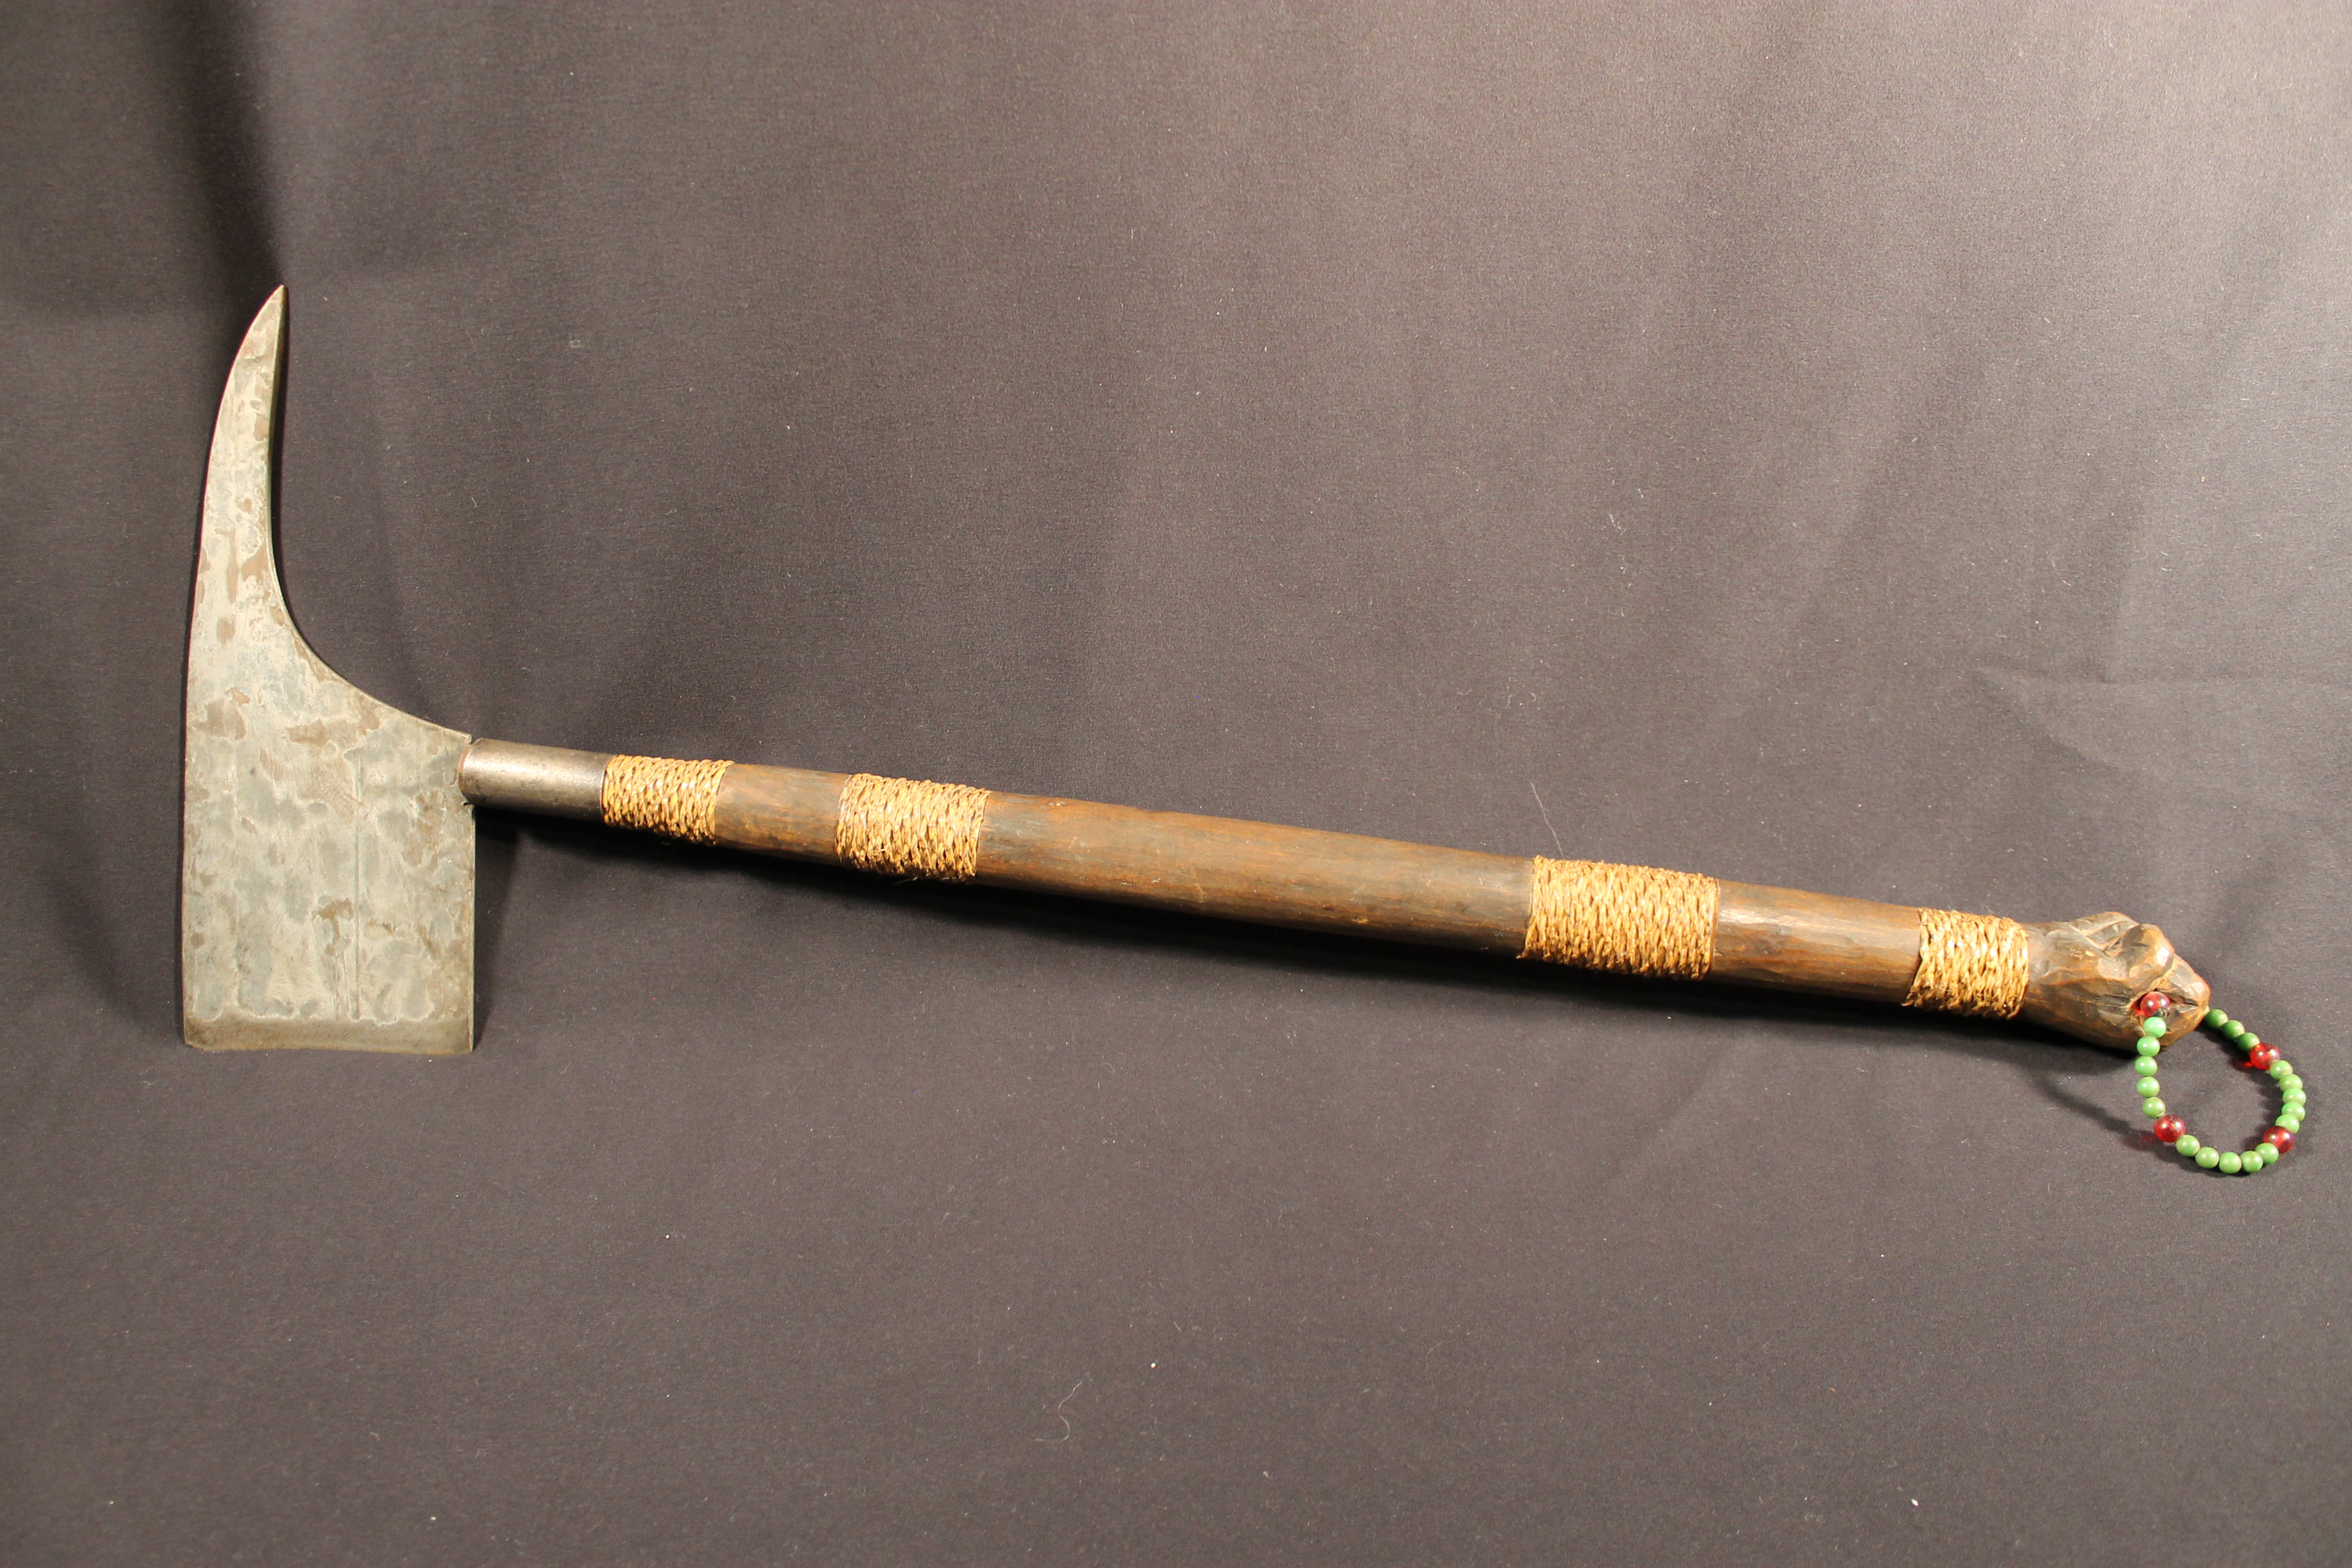 Metal axe head, front part is sharpened and back part is flat. Handle is a mixture of vegetal fibers and wood. Bottom of handle has a red and green beaded-like-bracelet looped through the end  